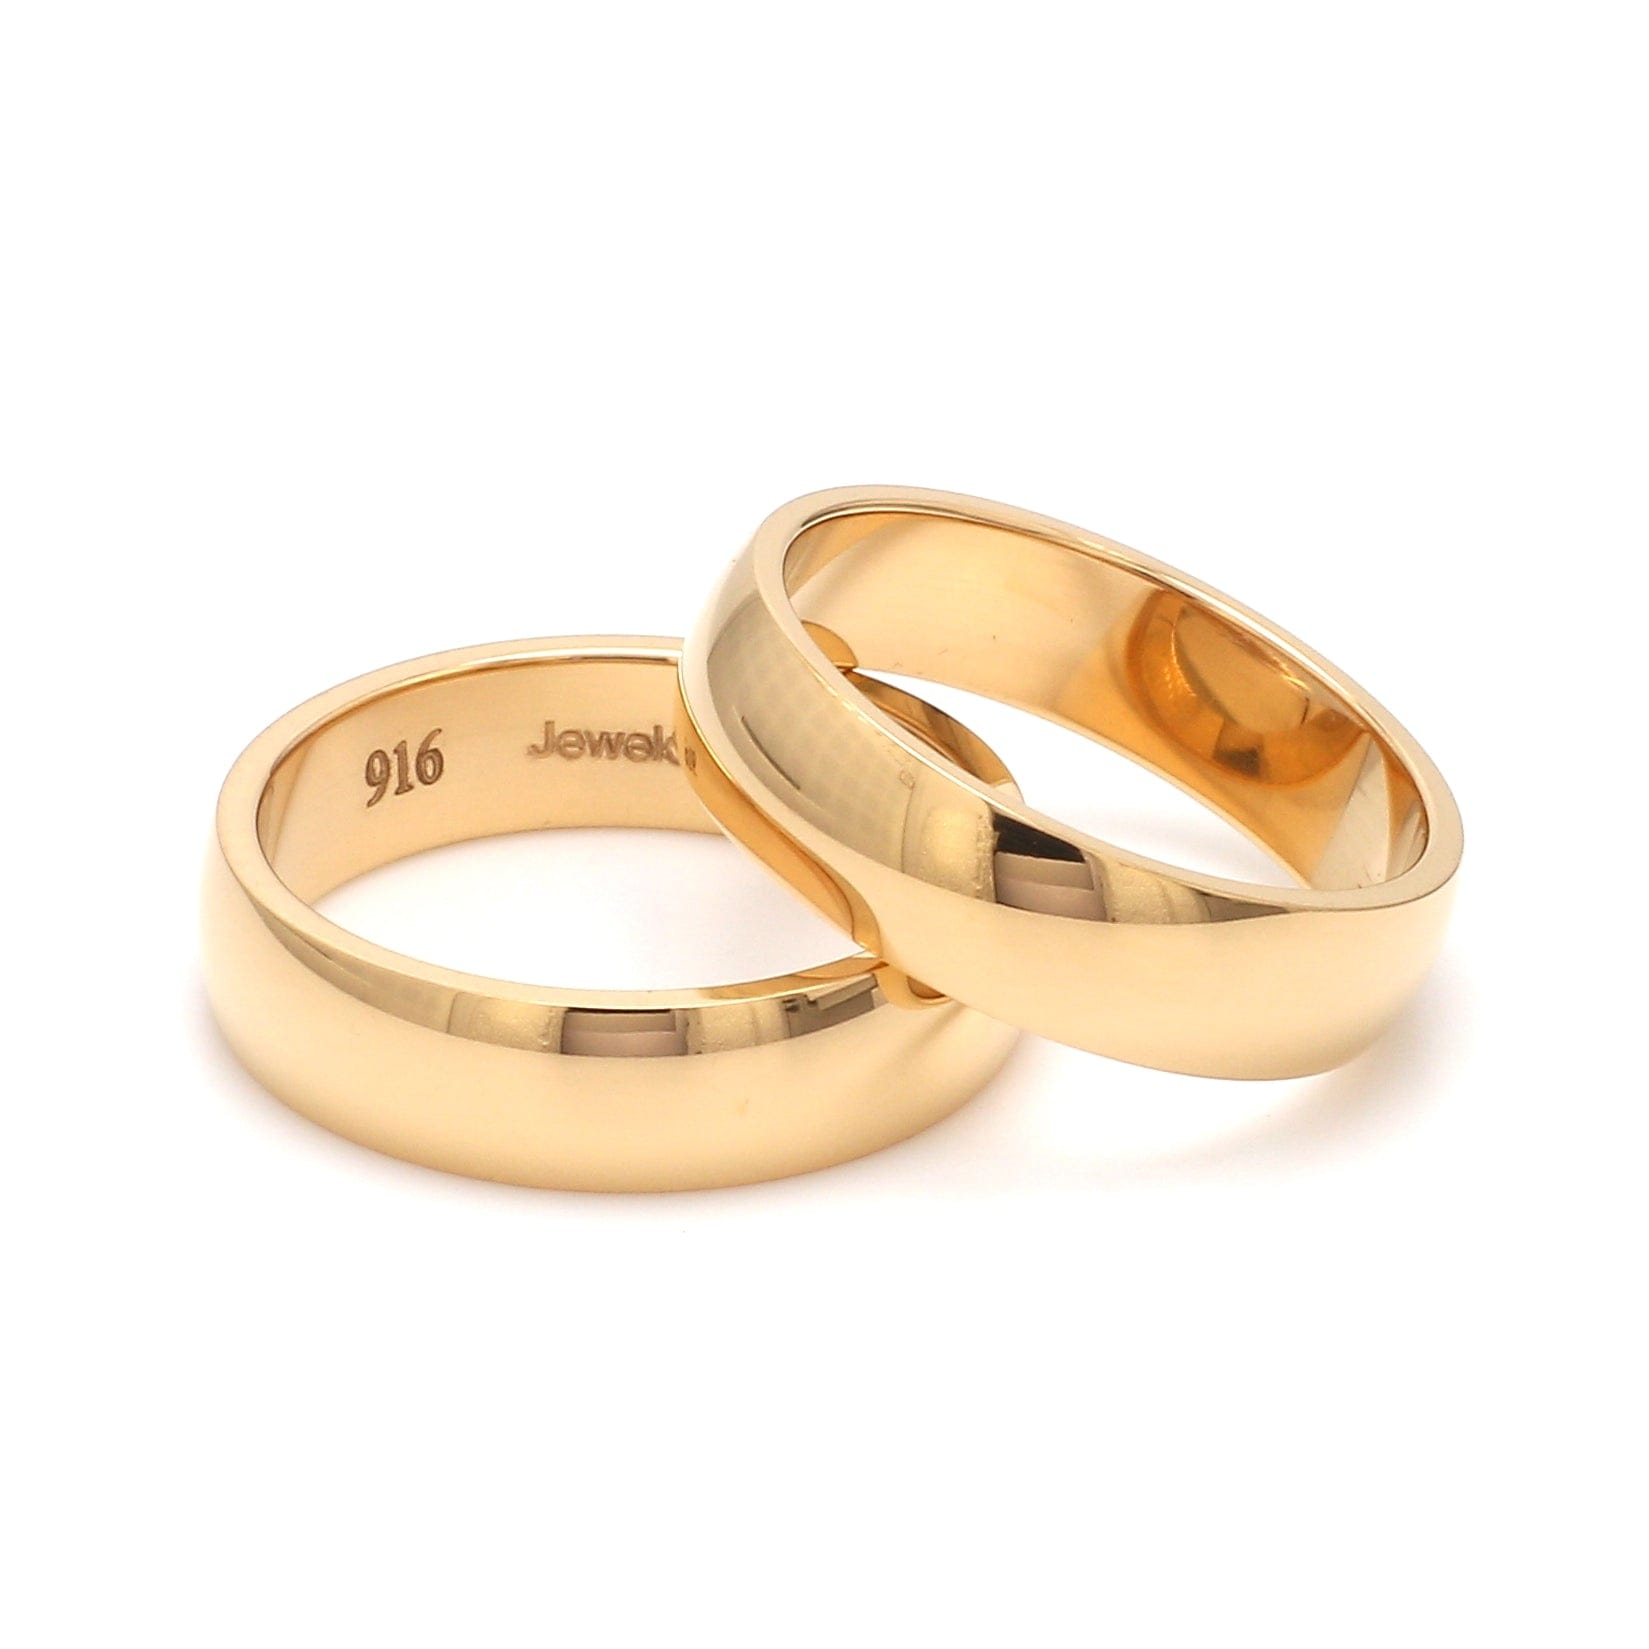 Gold Finger Ring Price Starting From Rs 2,000/Gm. Find Verified Sellers in  Bangalore - JdMart